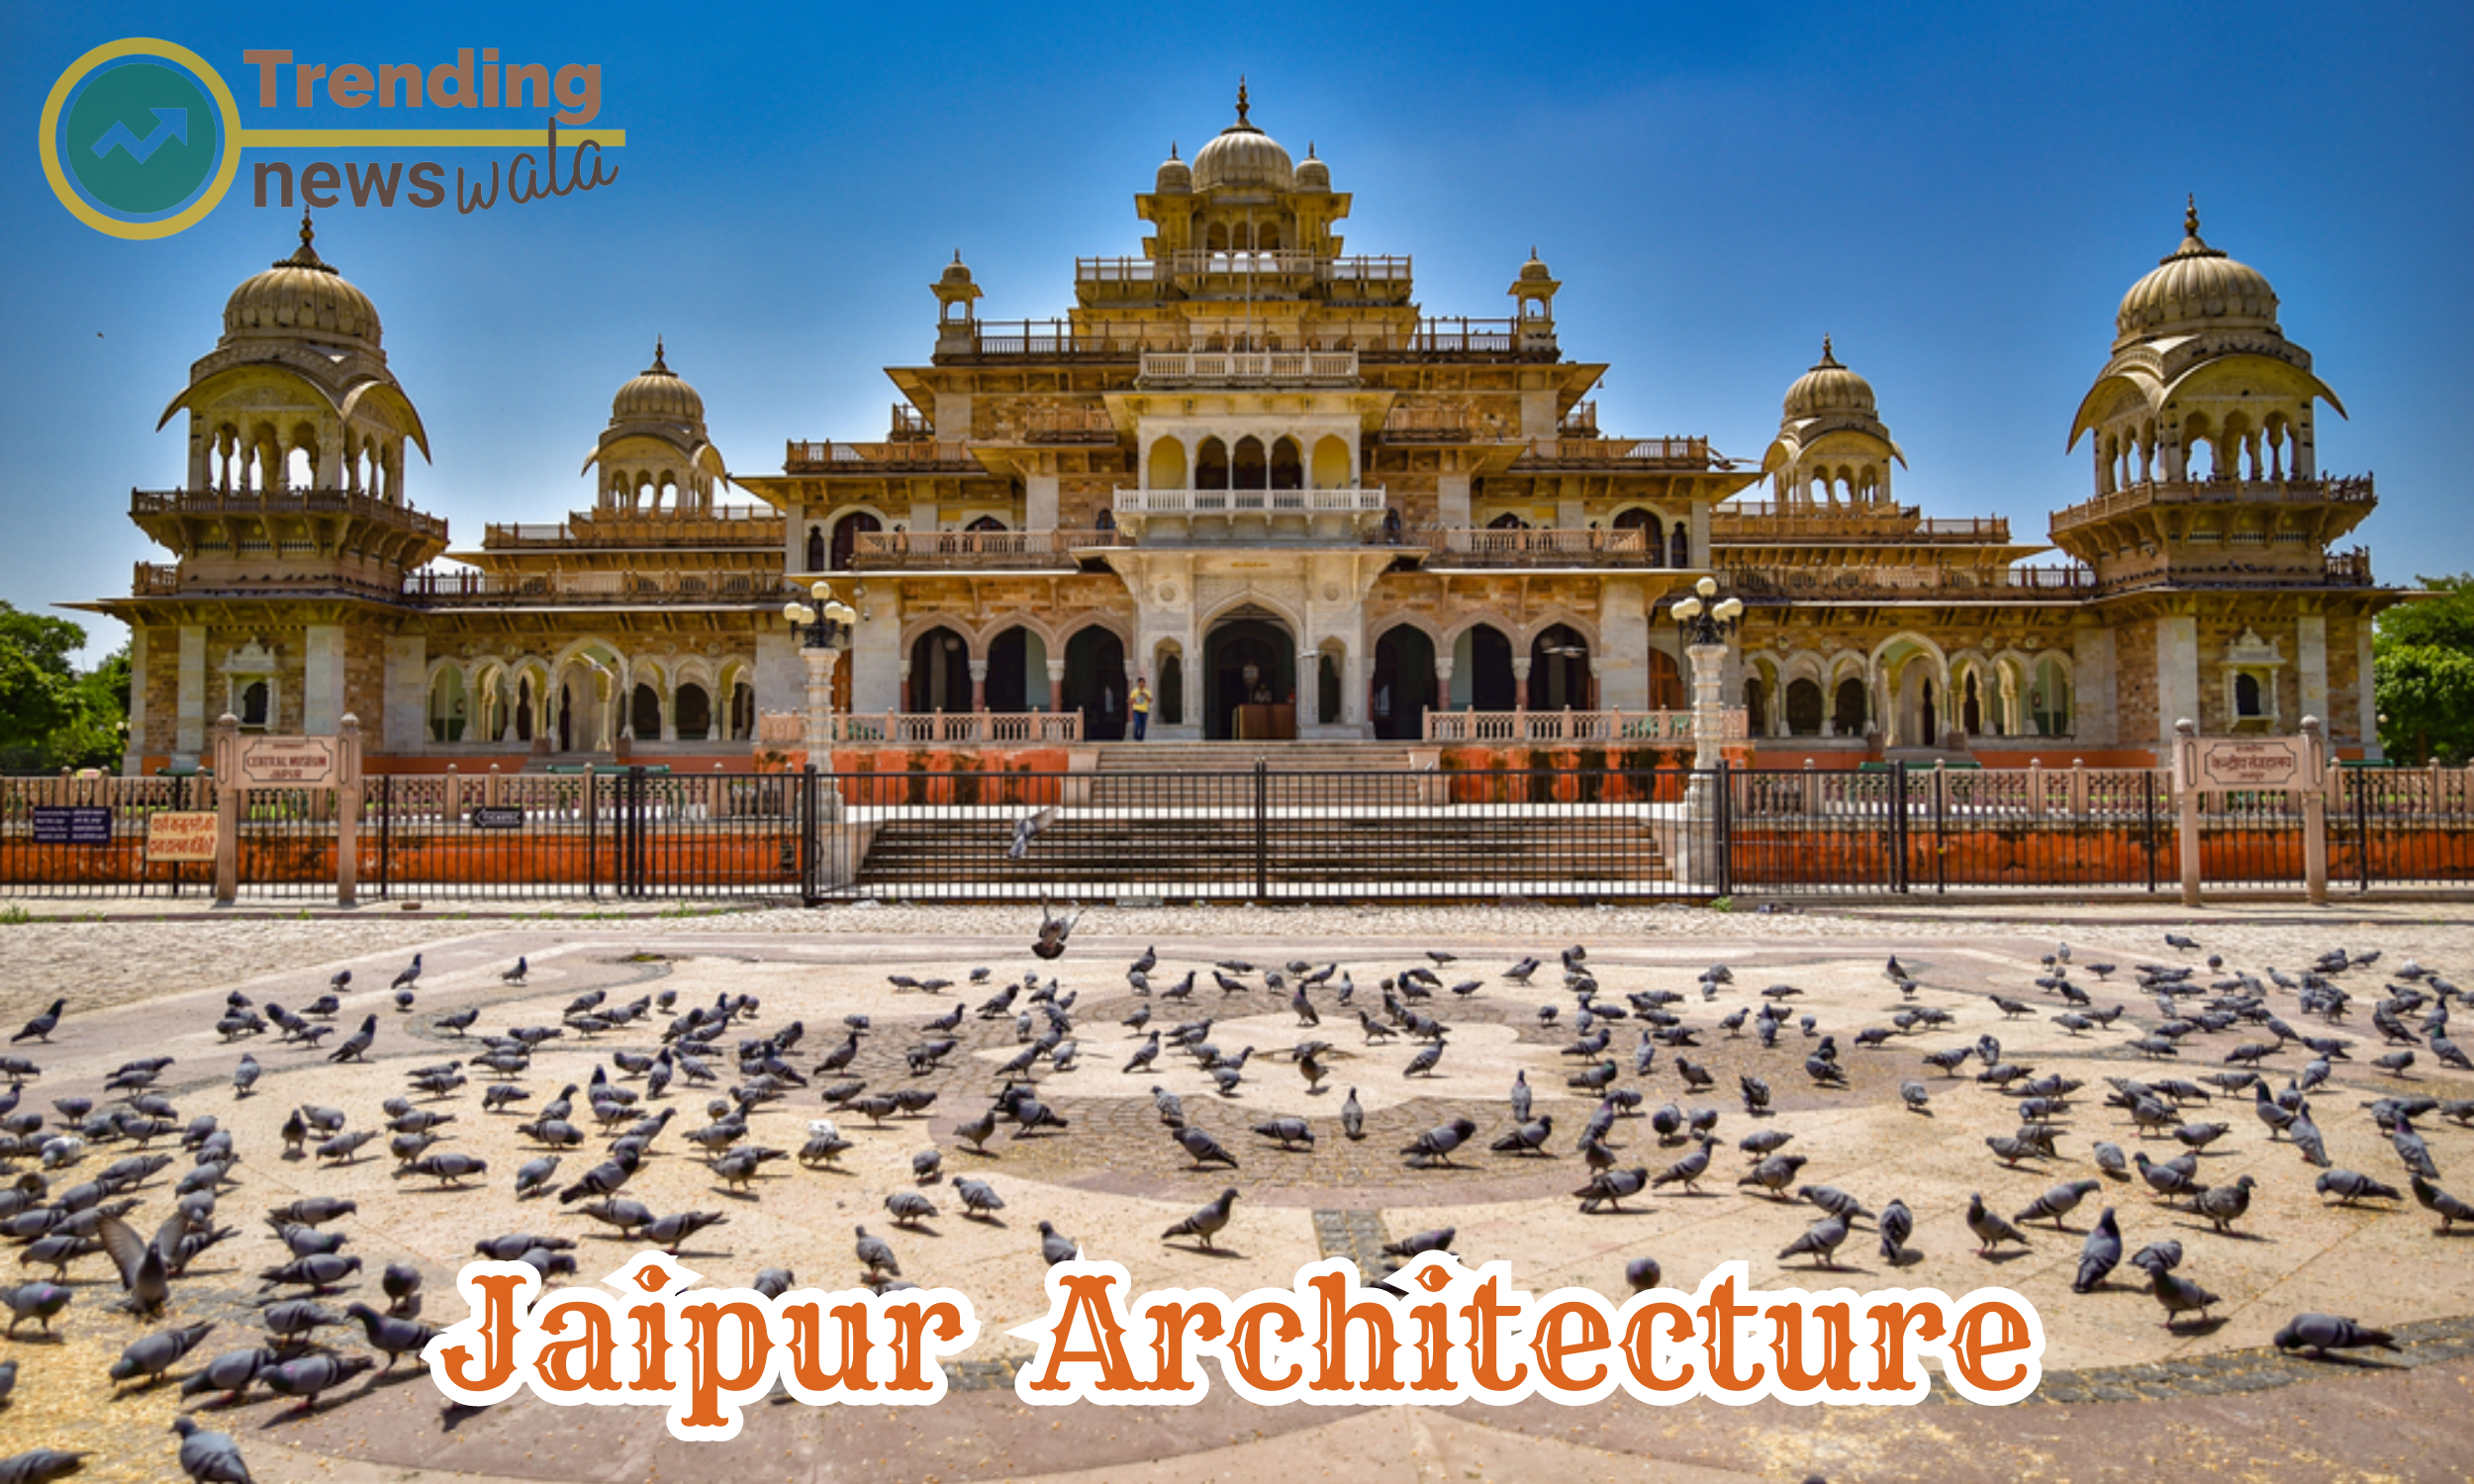  Indian state of Rajasthan, is renowned for its distinct and vibrant architecture